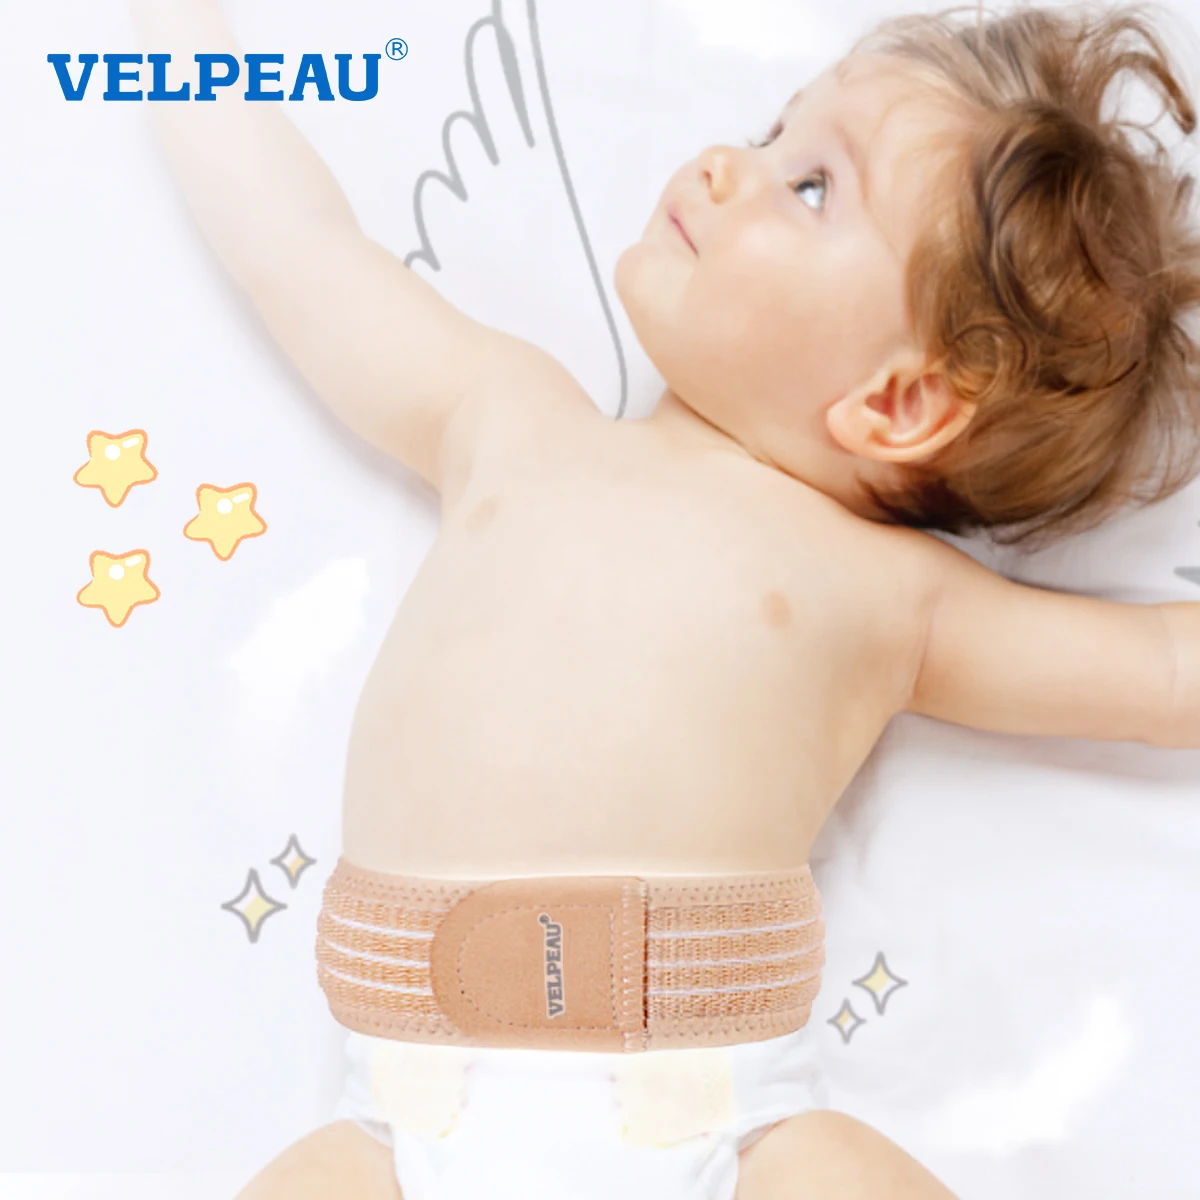 

VELPEAU Umbilical Hernia Belt Infant for Baby Newborn Belly Button with 3 Compress Pads Navel Abdominal Binder, One Size＜18"